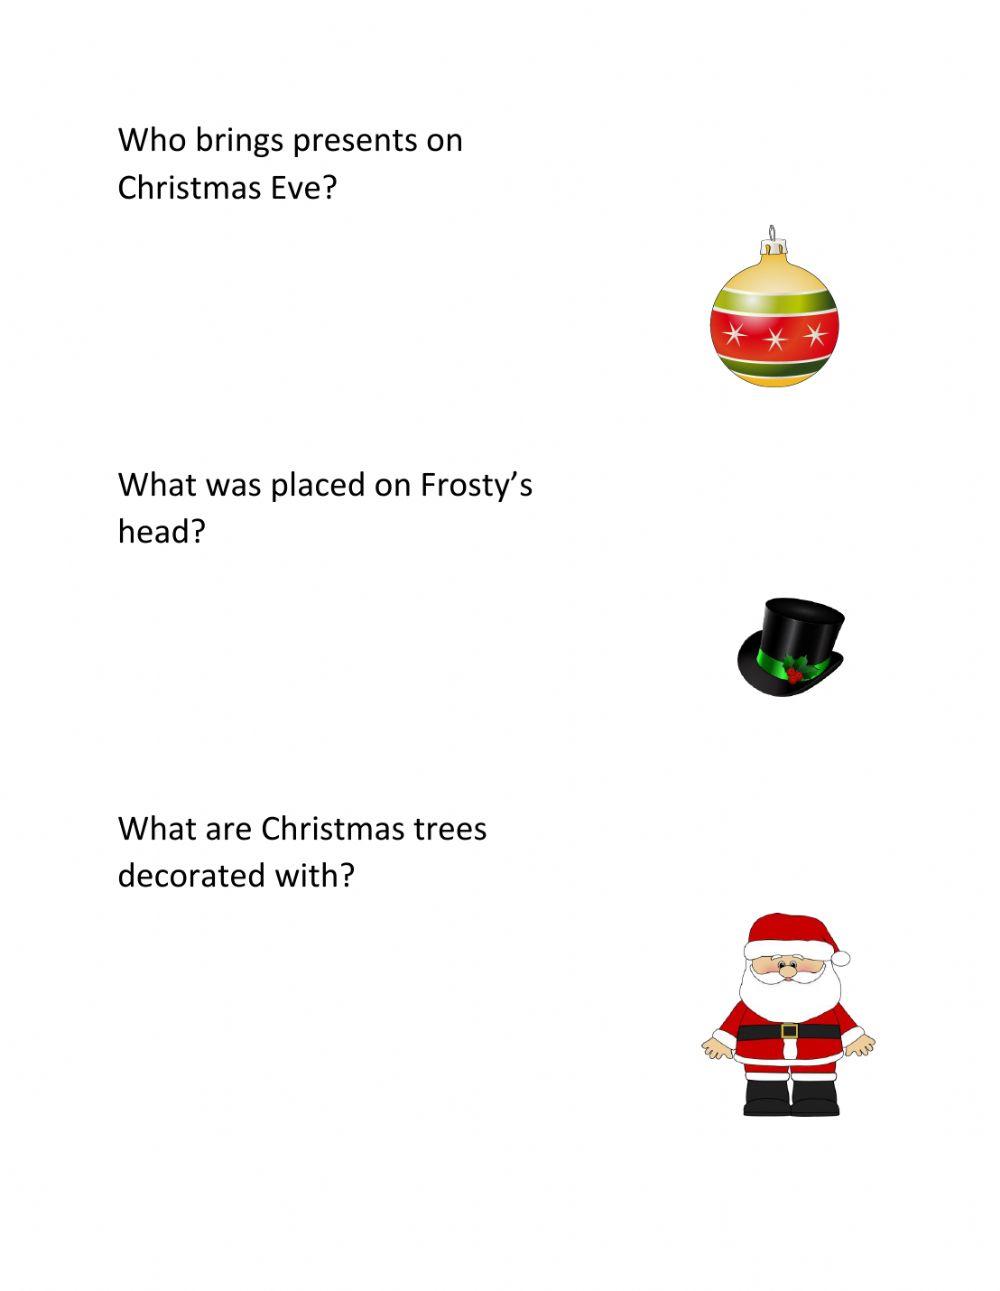 Christmas WH Questions